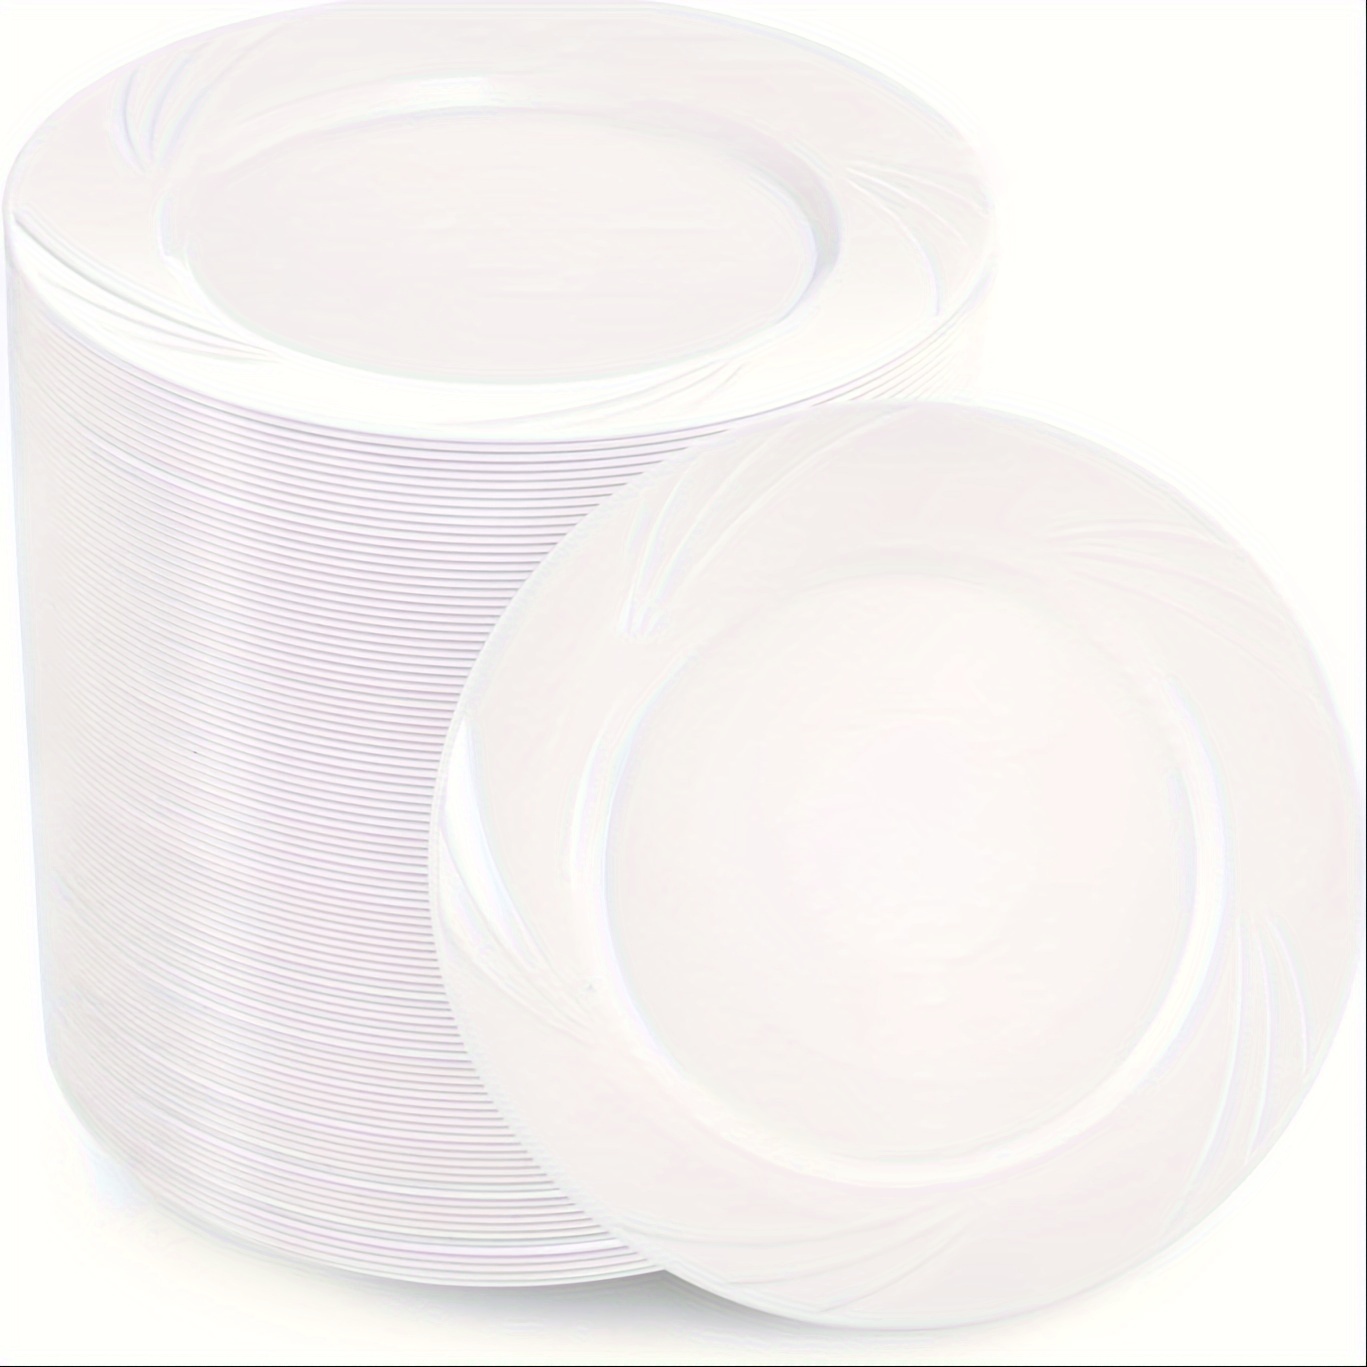 

100pcs White Plastic Plates-6.6inch Disposable Salad/dessert Plates-premium Dessert Plates Disposable-appetizer Plastic Plates - Plastic Cake Plates Suitable For All Parties